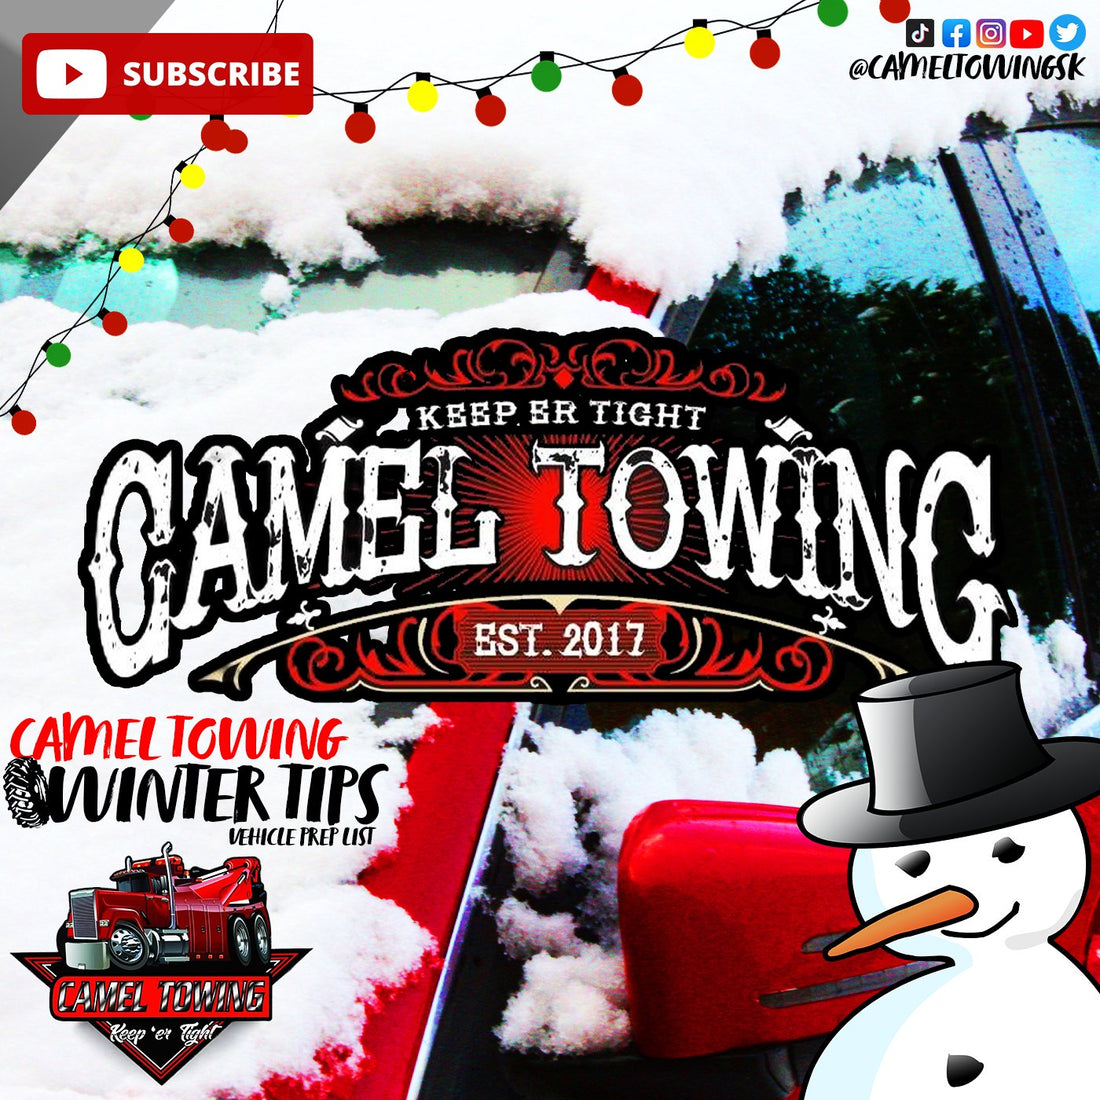 Camel Towing Winter Auto Tips - Camel Towing and Sales